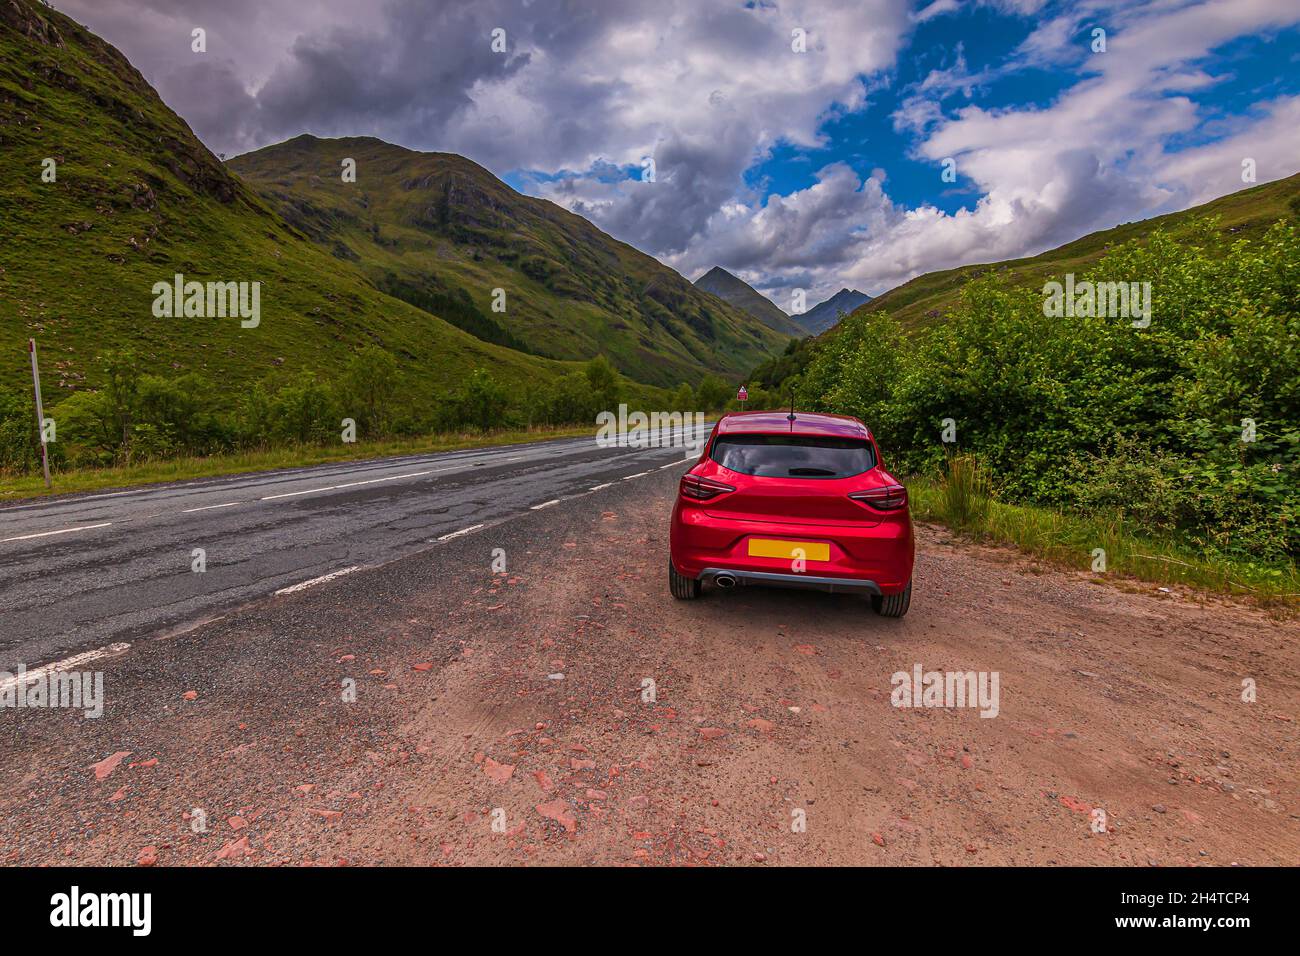 Mountain range in the Scottish Highlands in summer. Mountains and hills in Scotland in sunshine. Red car in the foreground next to a road. Road throug Stock Photo